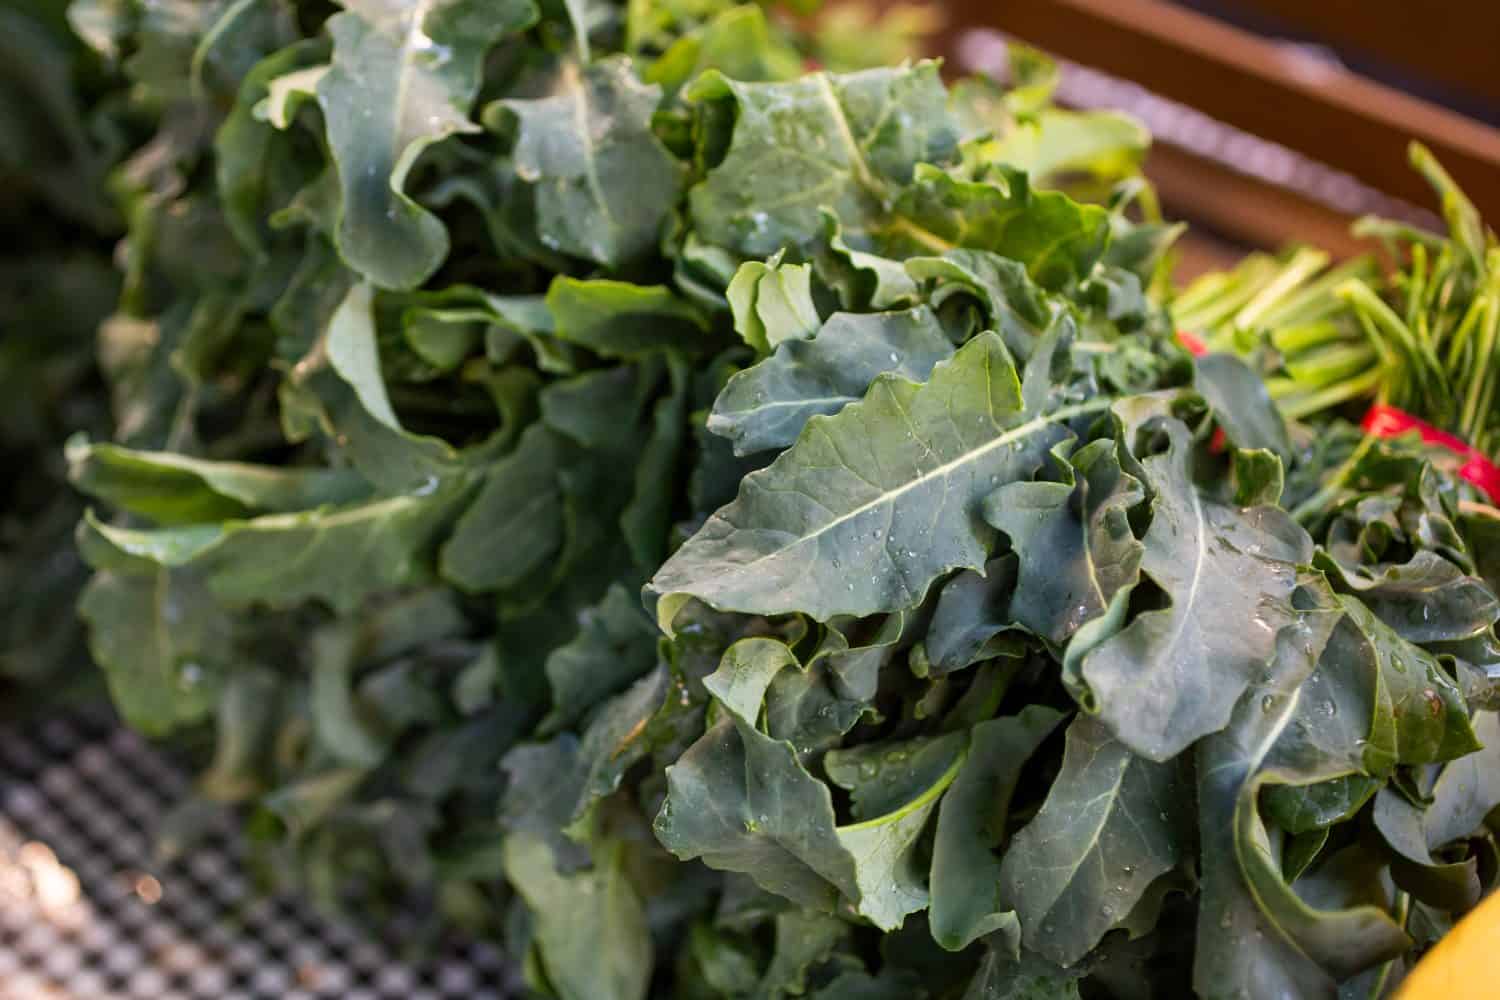 A view of several bunches of spigarello leaves on display at a local farmers market.